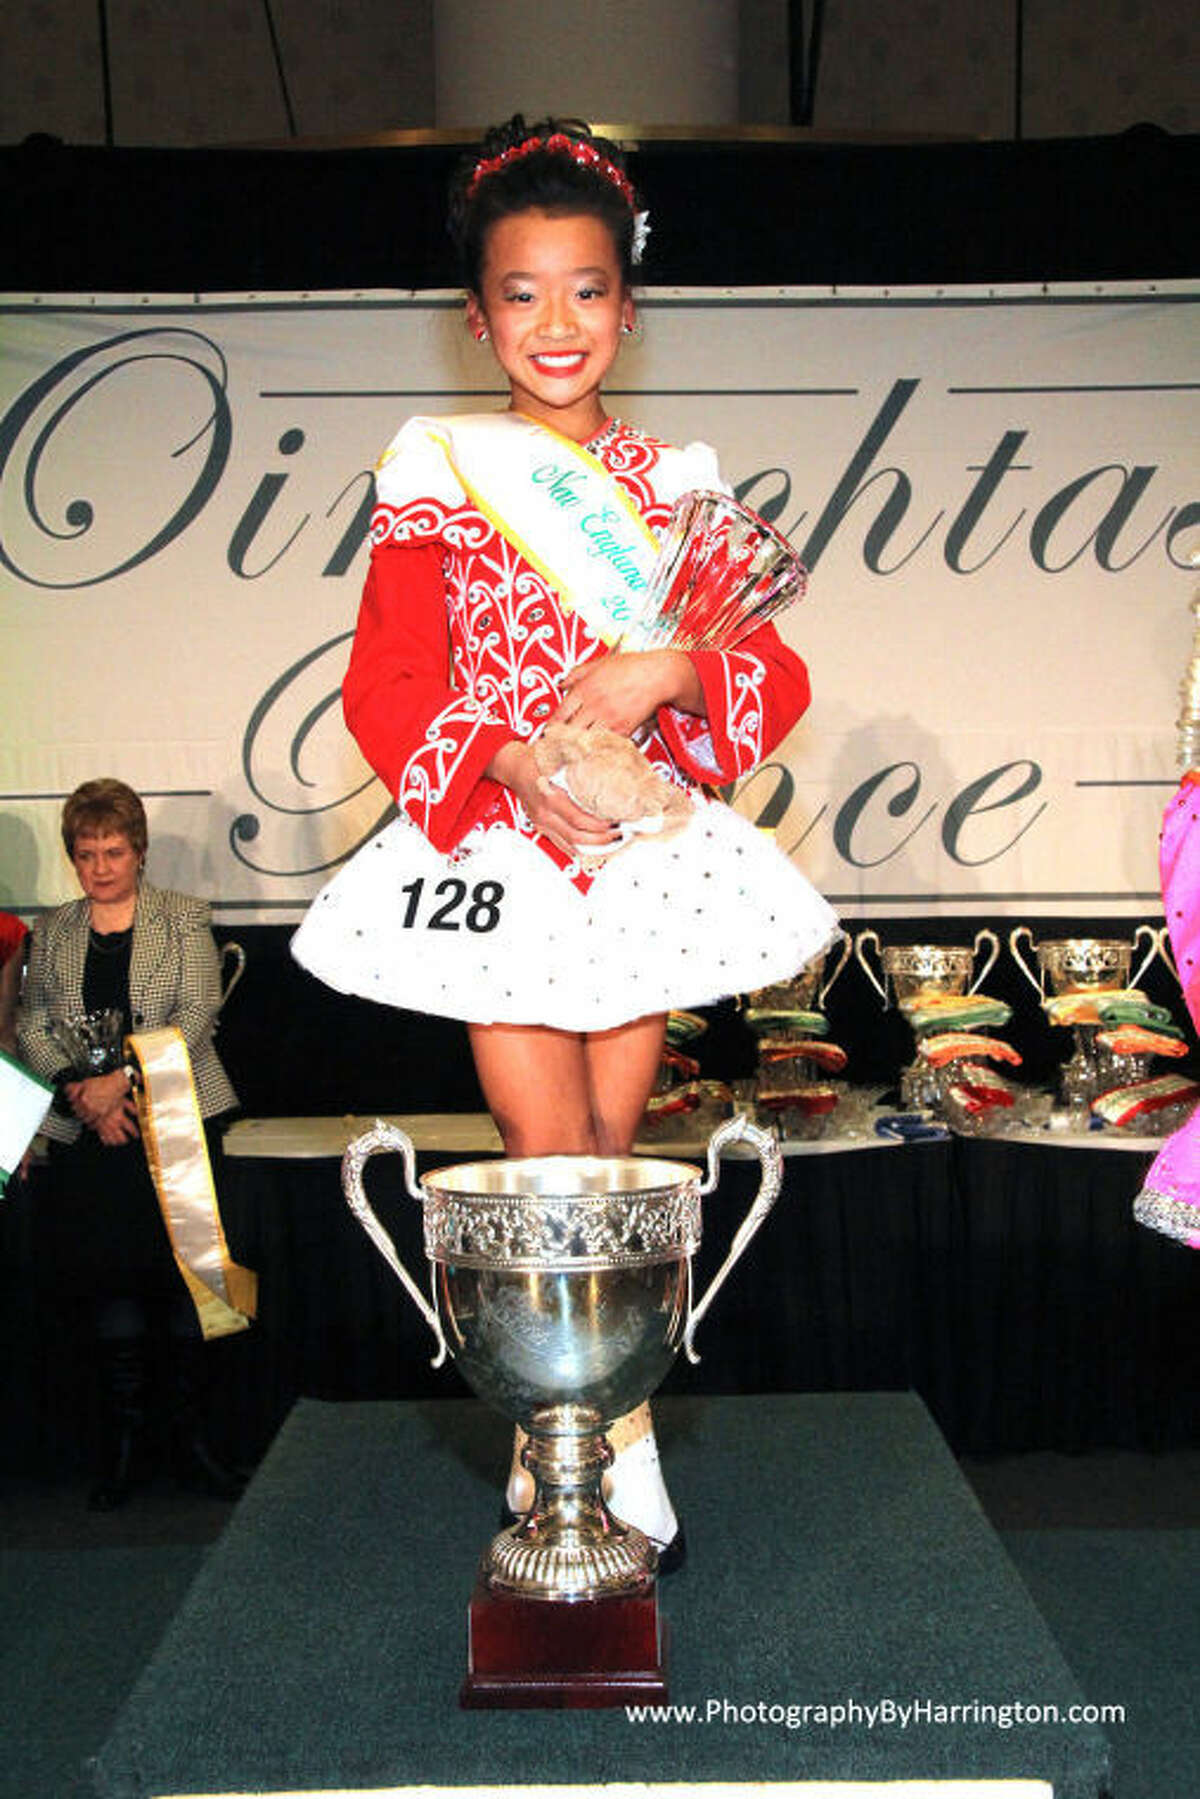 Chloe Armstrong is shown with the trophy she won at the competition.